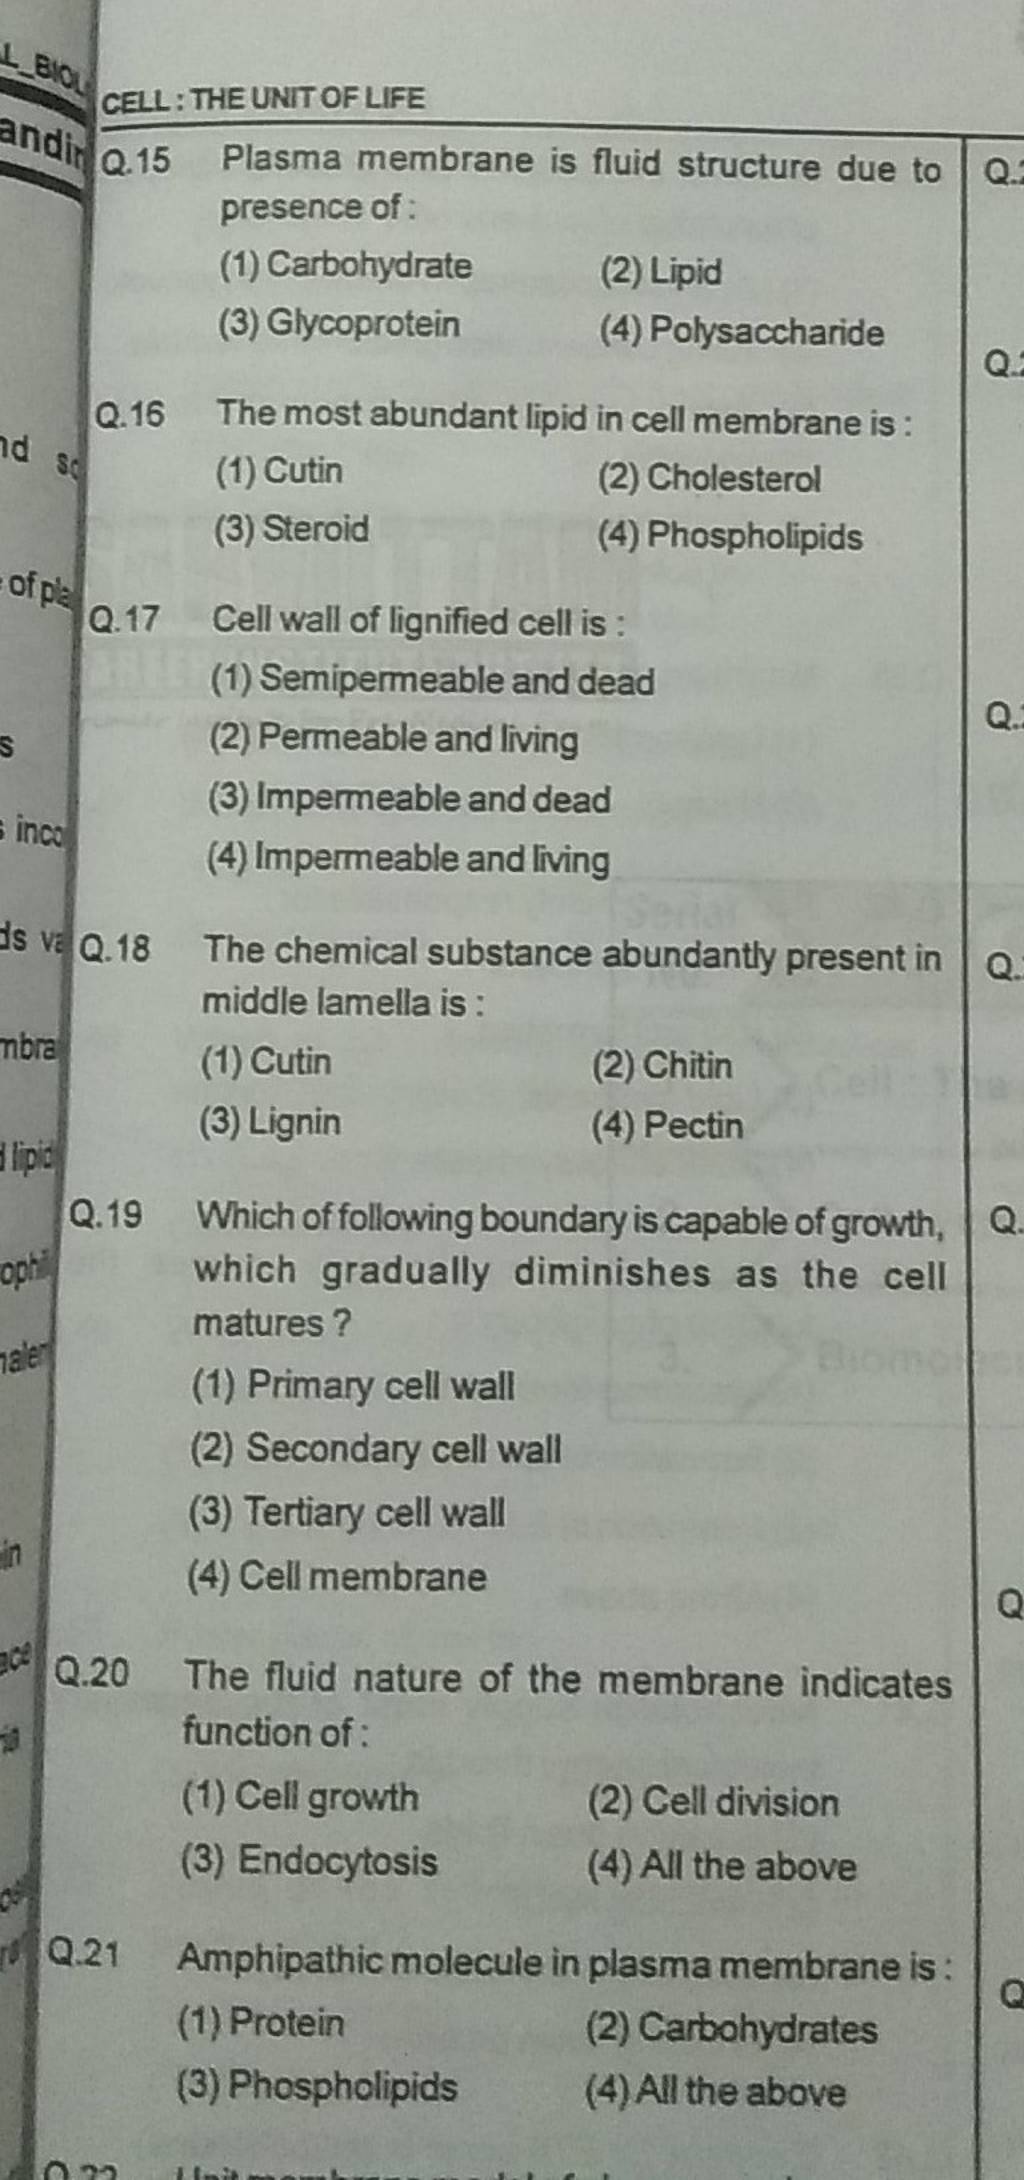 Q.18 The chemical substance abundantly present in middle lamella is :